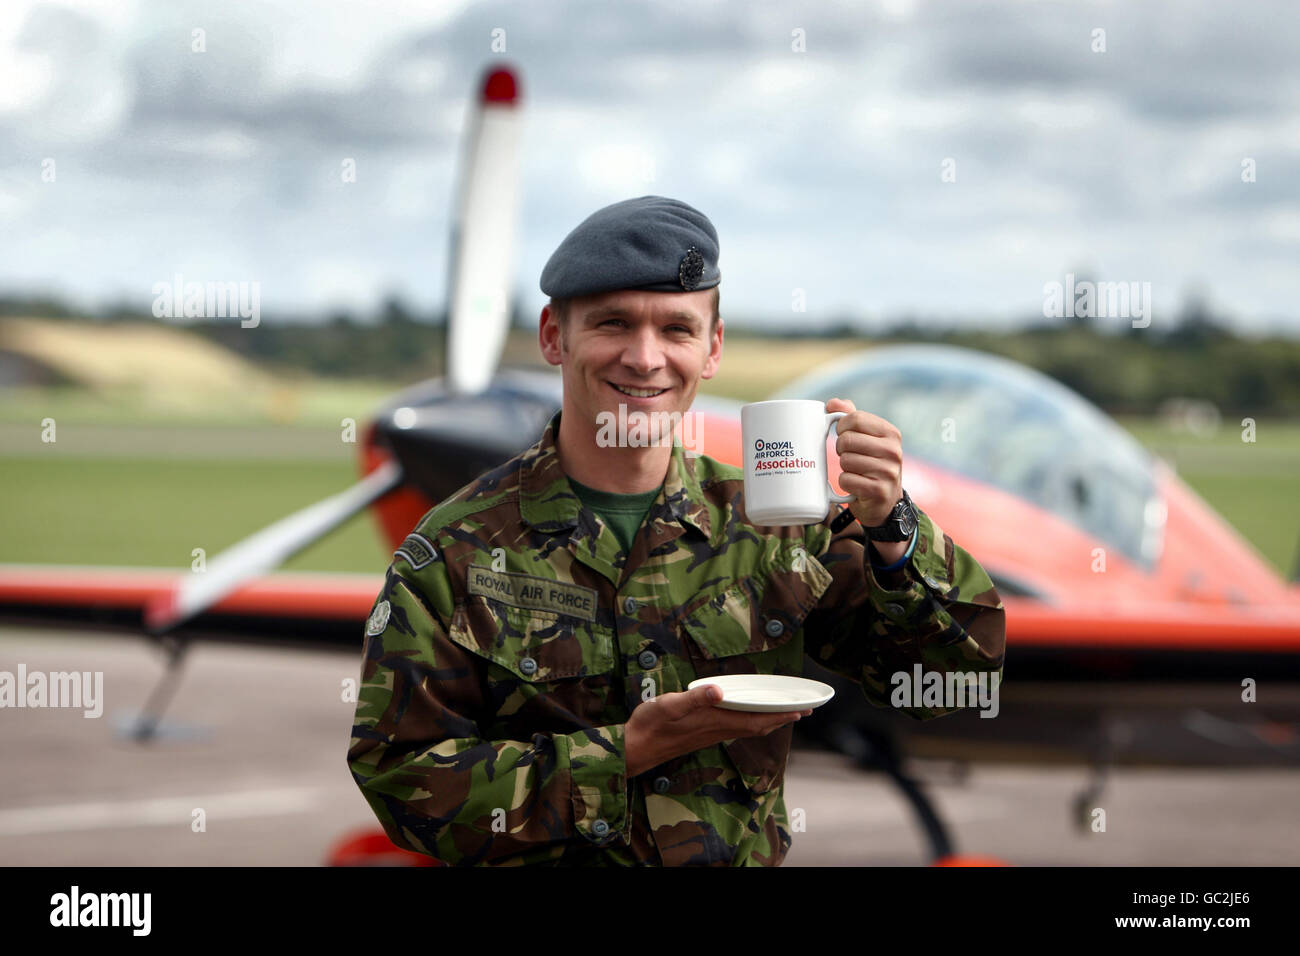 RAF serviceman Corporal Stewart Hefti after his world record 14 circuit loop the loop while drinking a cup of tea at RAF Cosford. The record was set as part of the RAF Association's 'Brew for the Few' fundraising initiative. Stock Photo